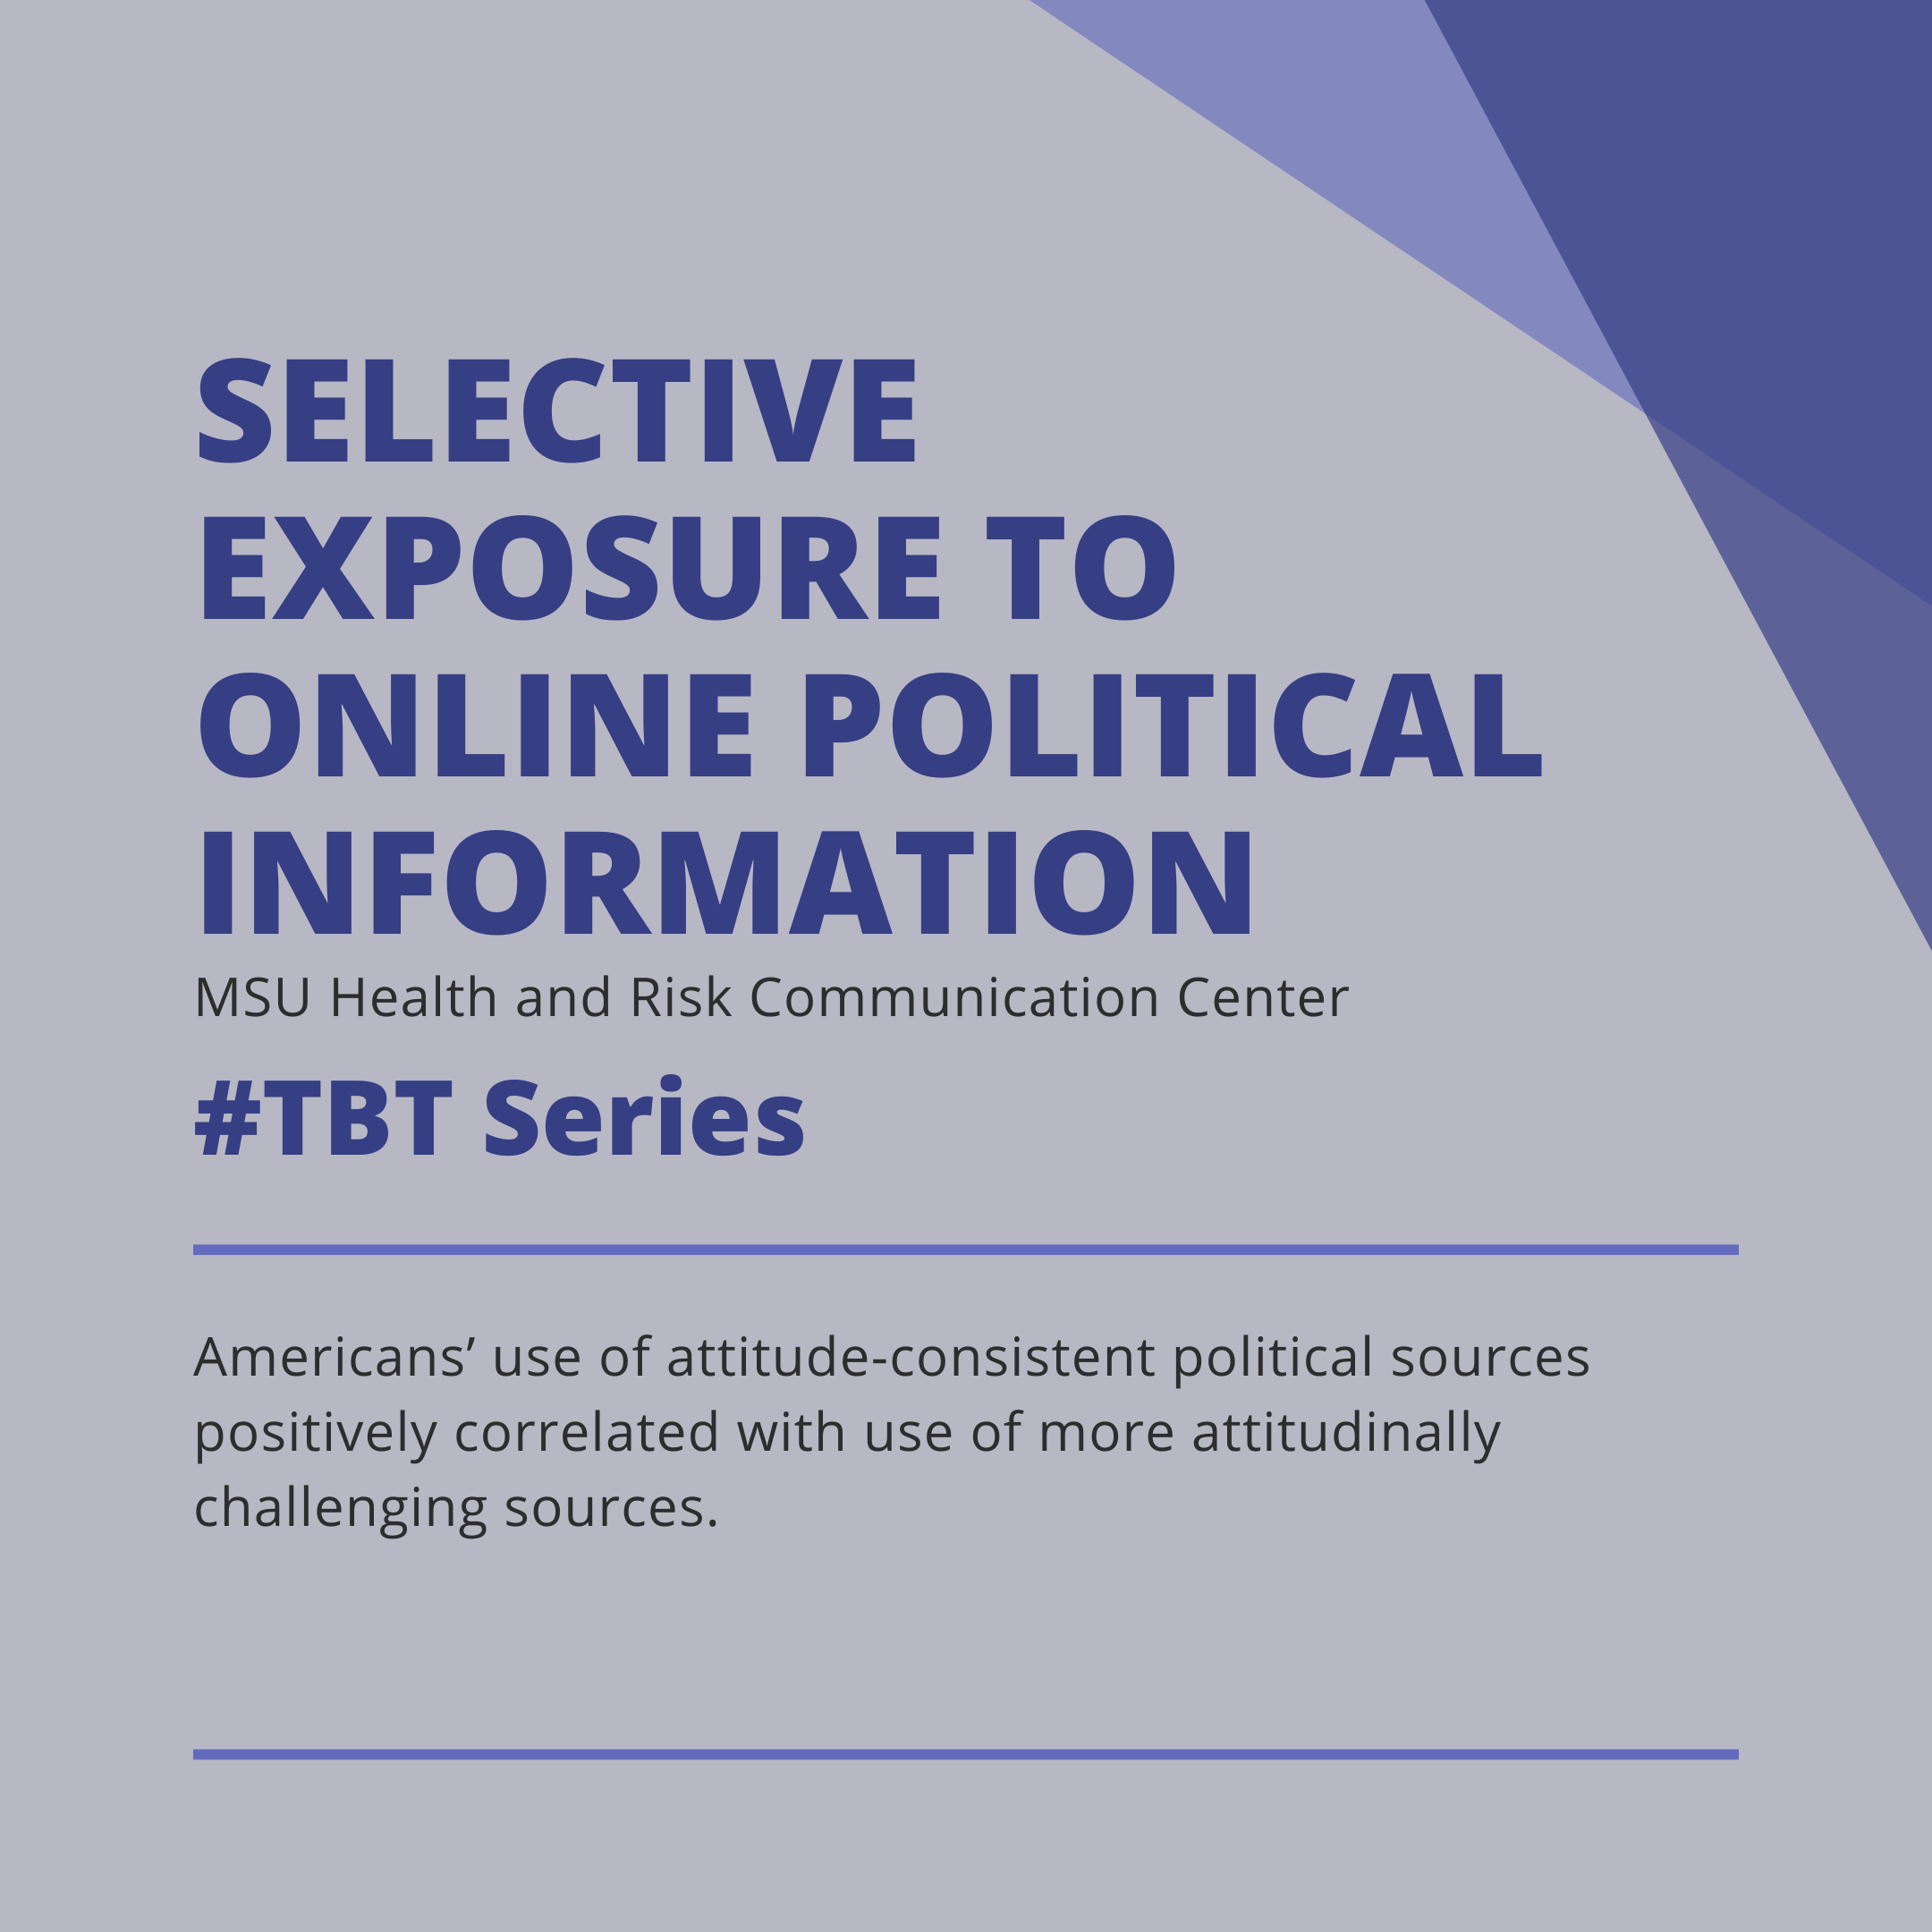 A Turn Toward Avoidance? Selective Exposure to Online Political Information